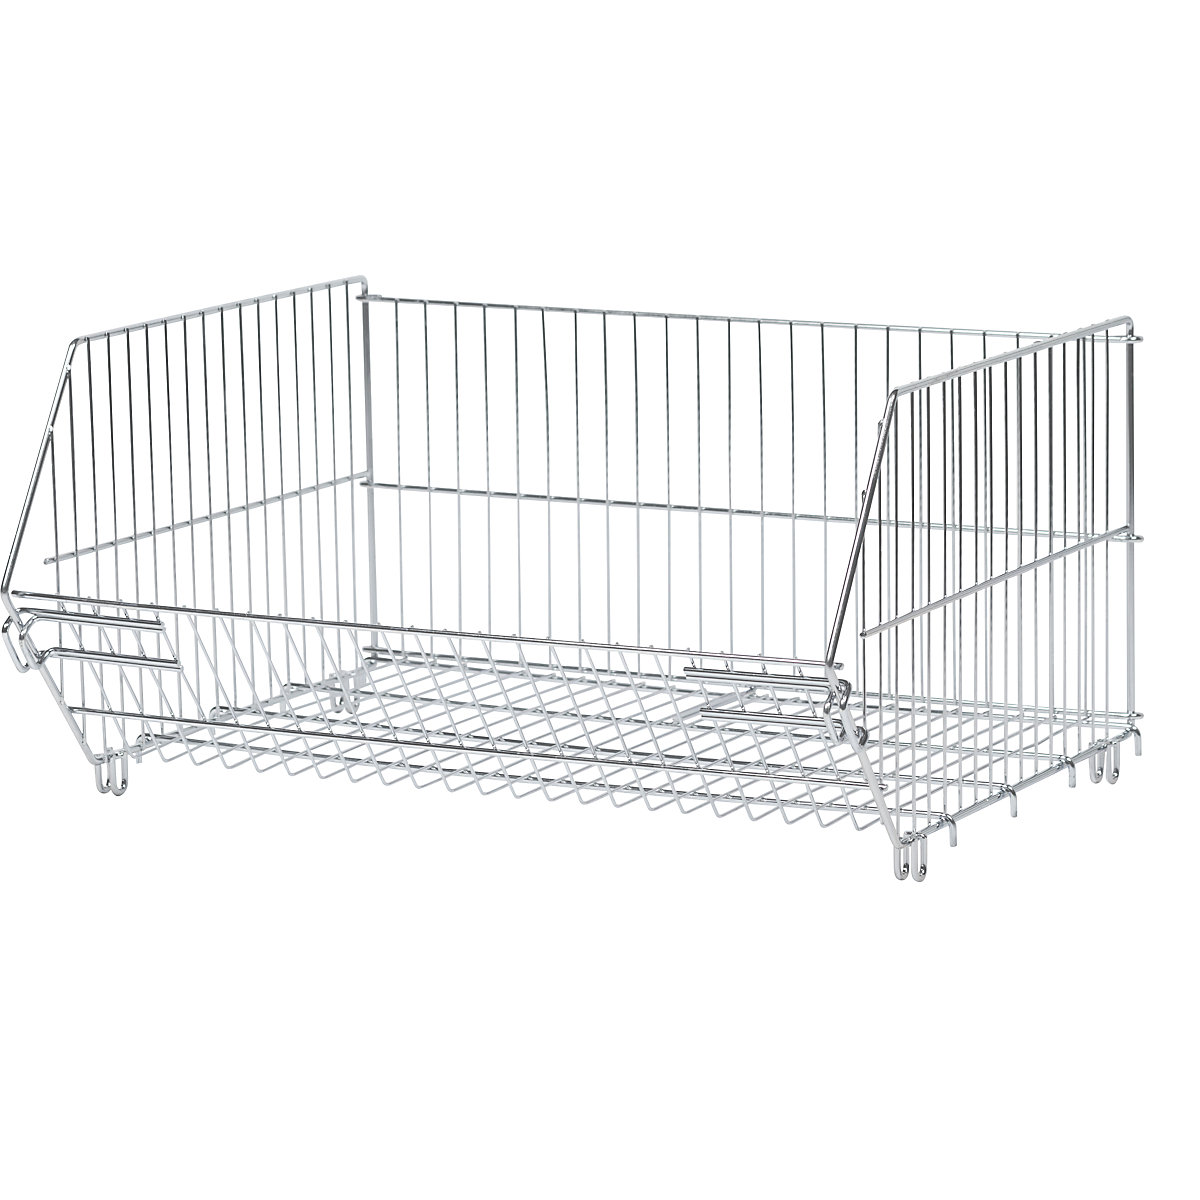 Stacking basket for shelving, LxWxH 620 x 420 x 230 mm, zinc plated-5